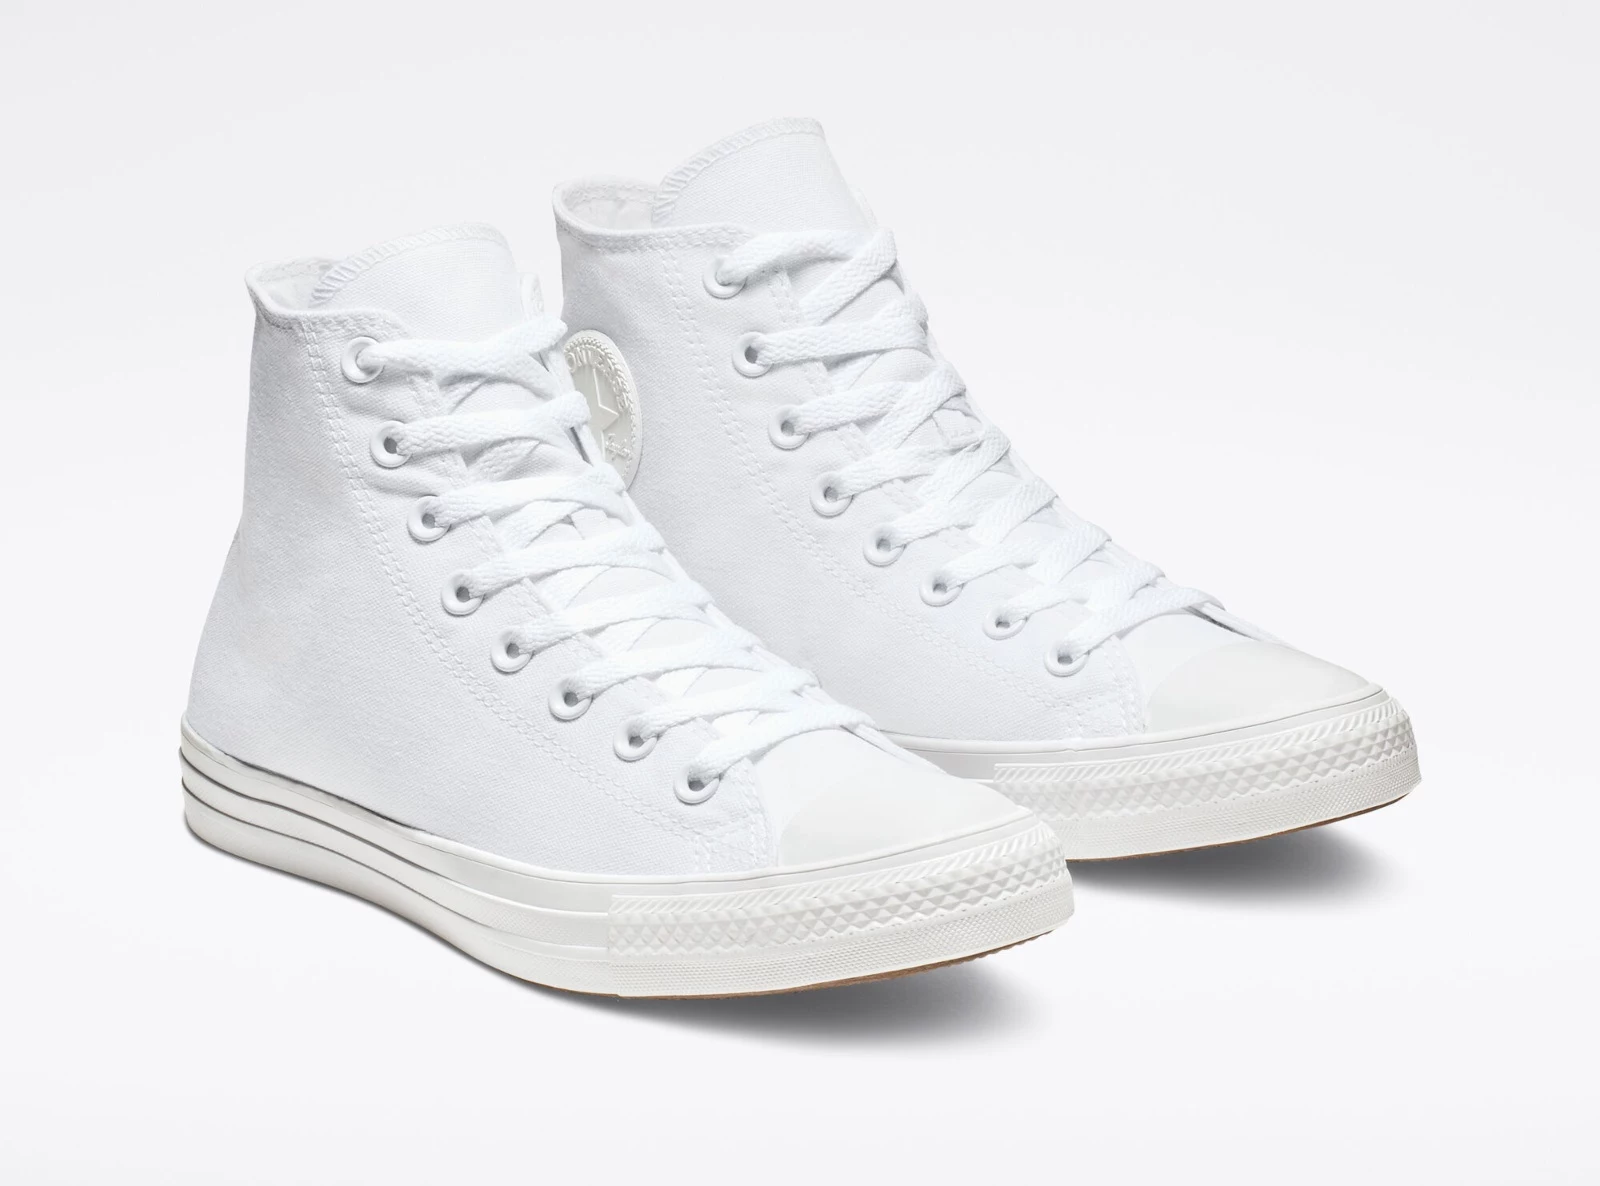 Converse Just Released A Wedding Shoe Line